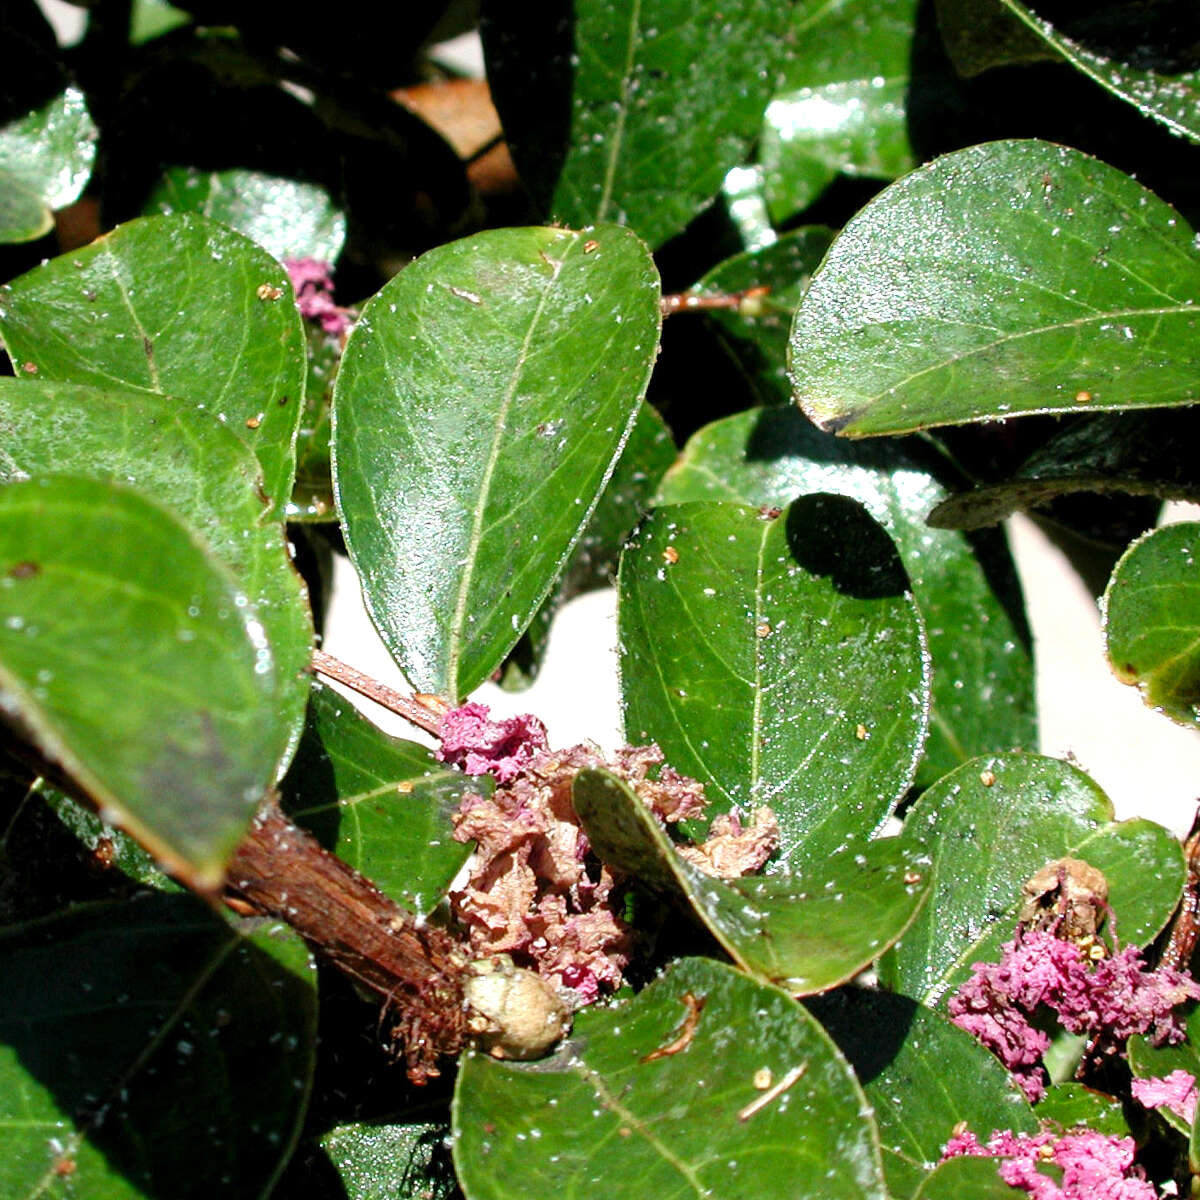 Even when aphids hit your crape myrtle, don't top it How To Get Rid Of Crape Myrtle Aphids